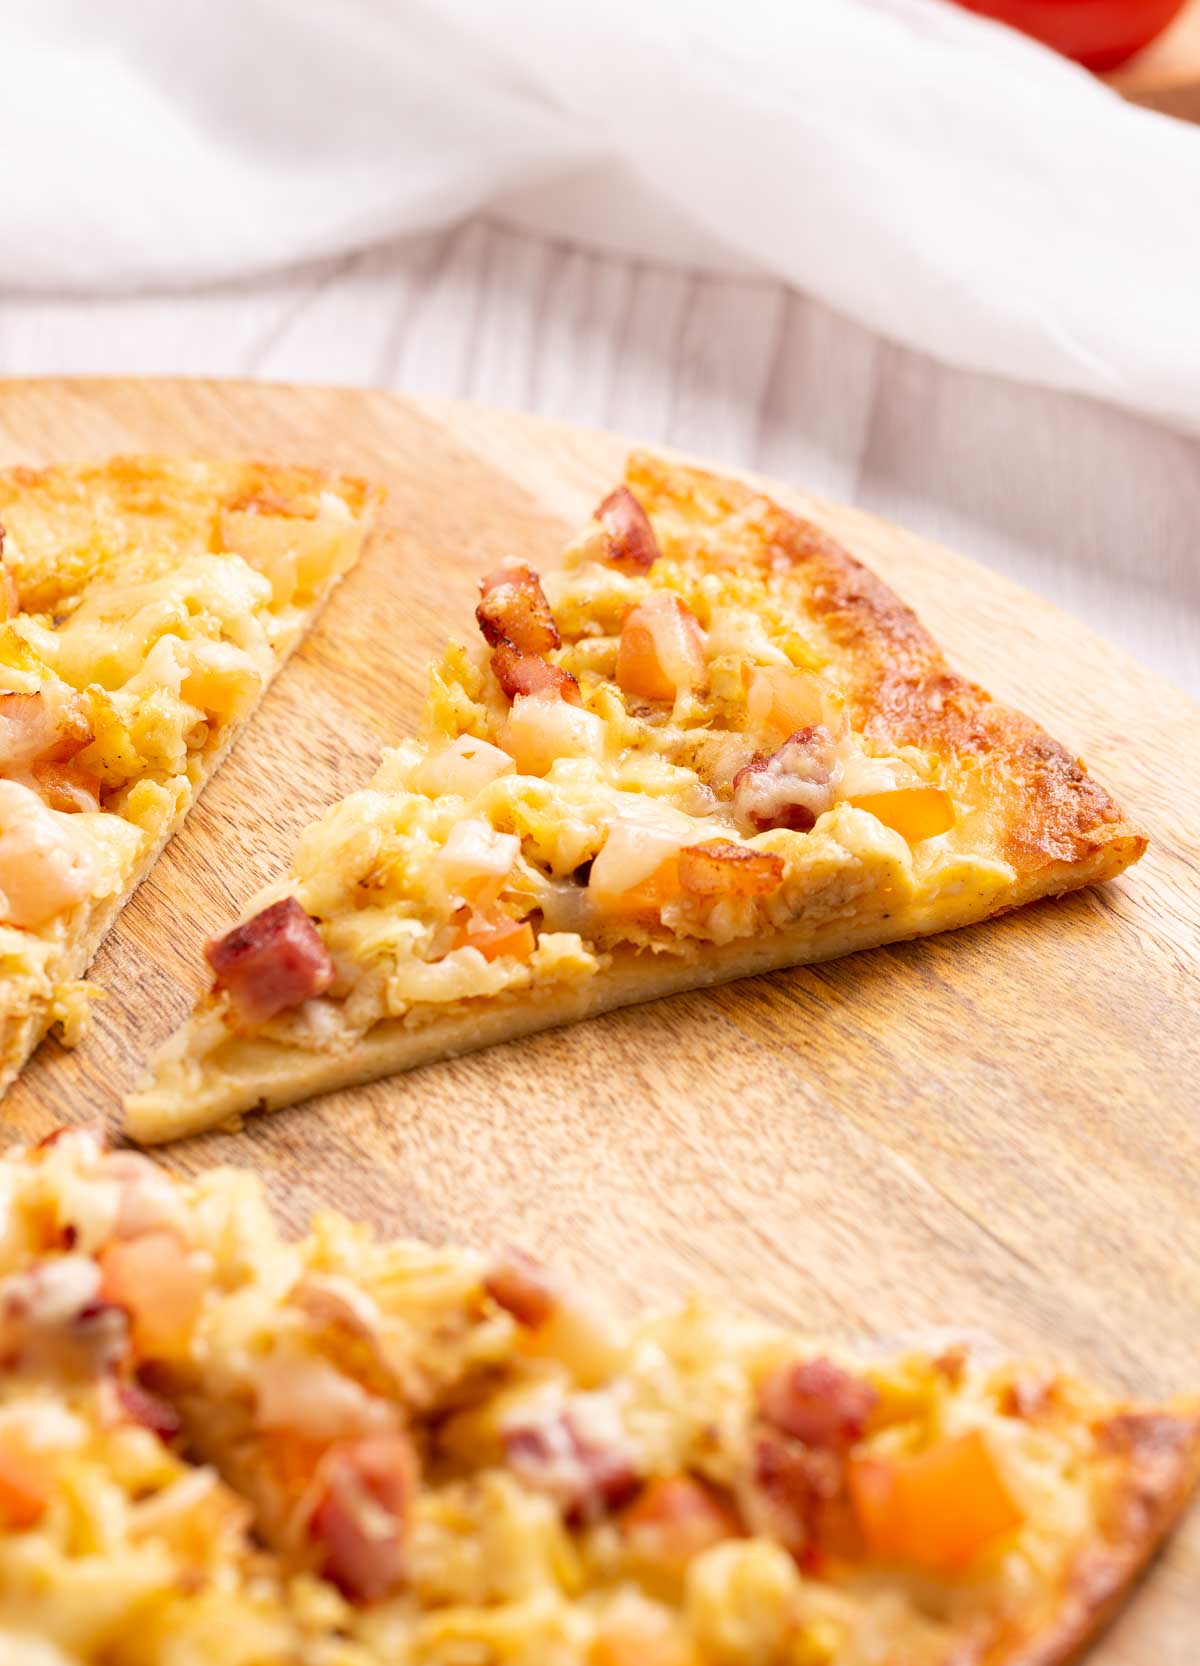 A slice of breakfast pizza with scrambled eggs, bacon, cheese and tomato.